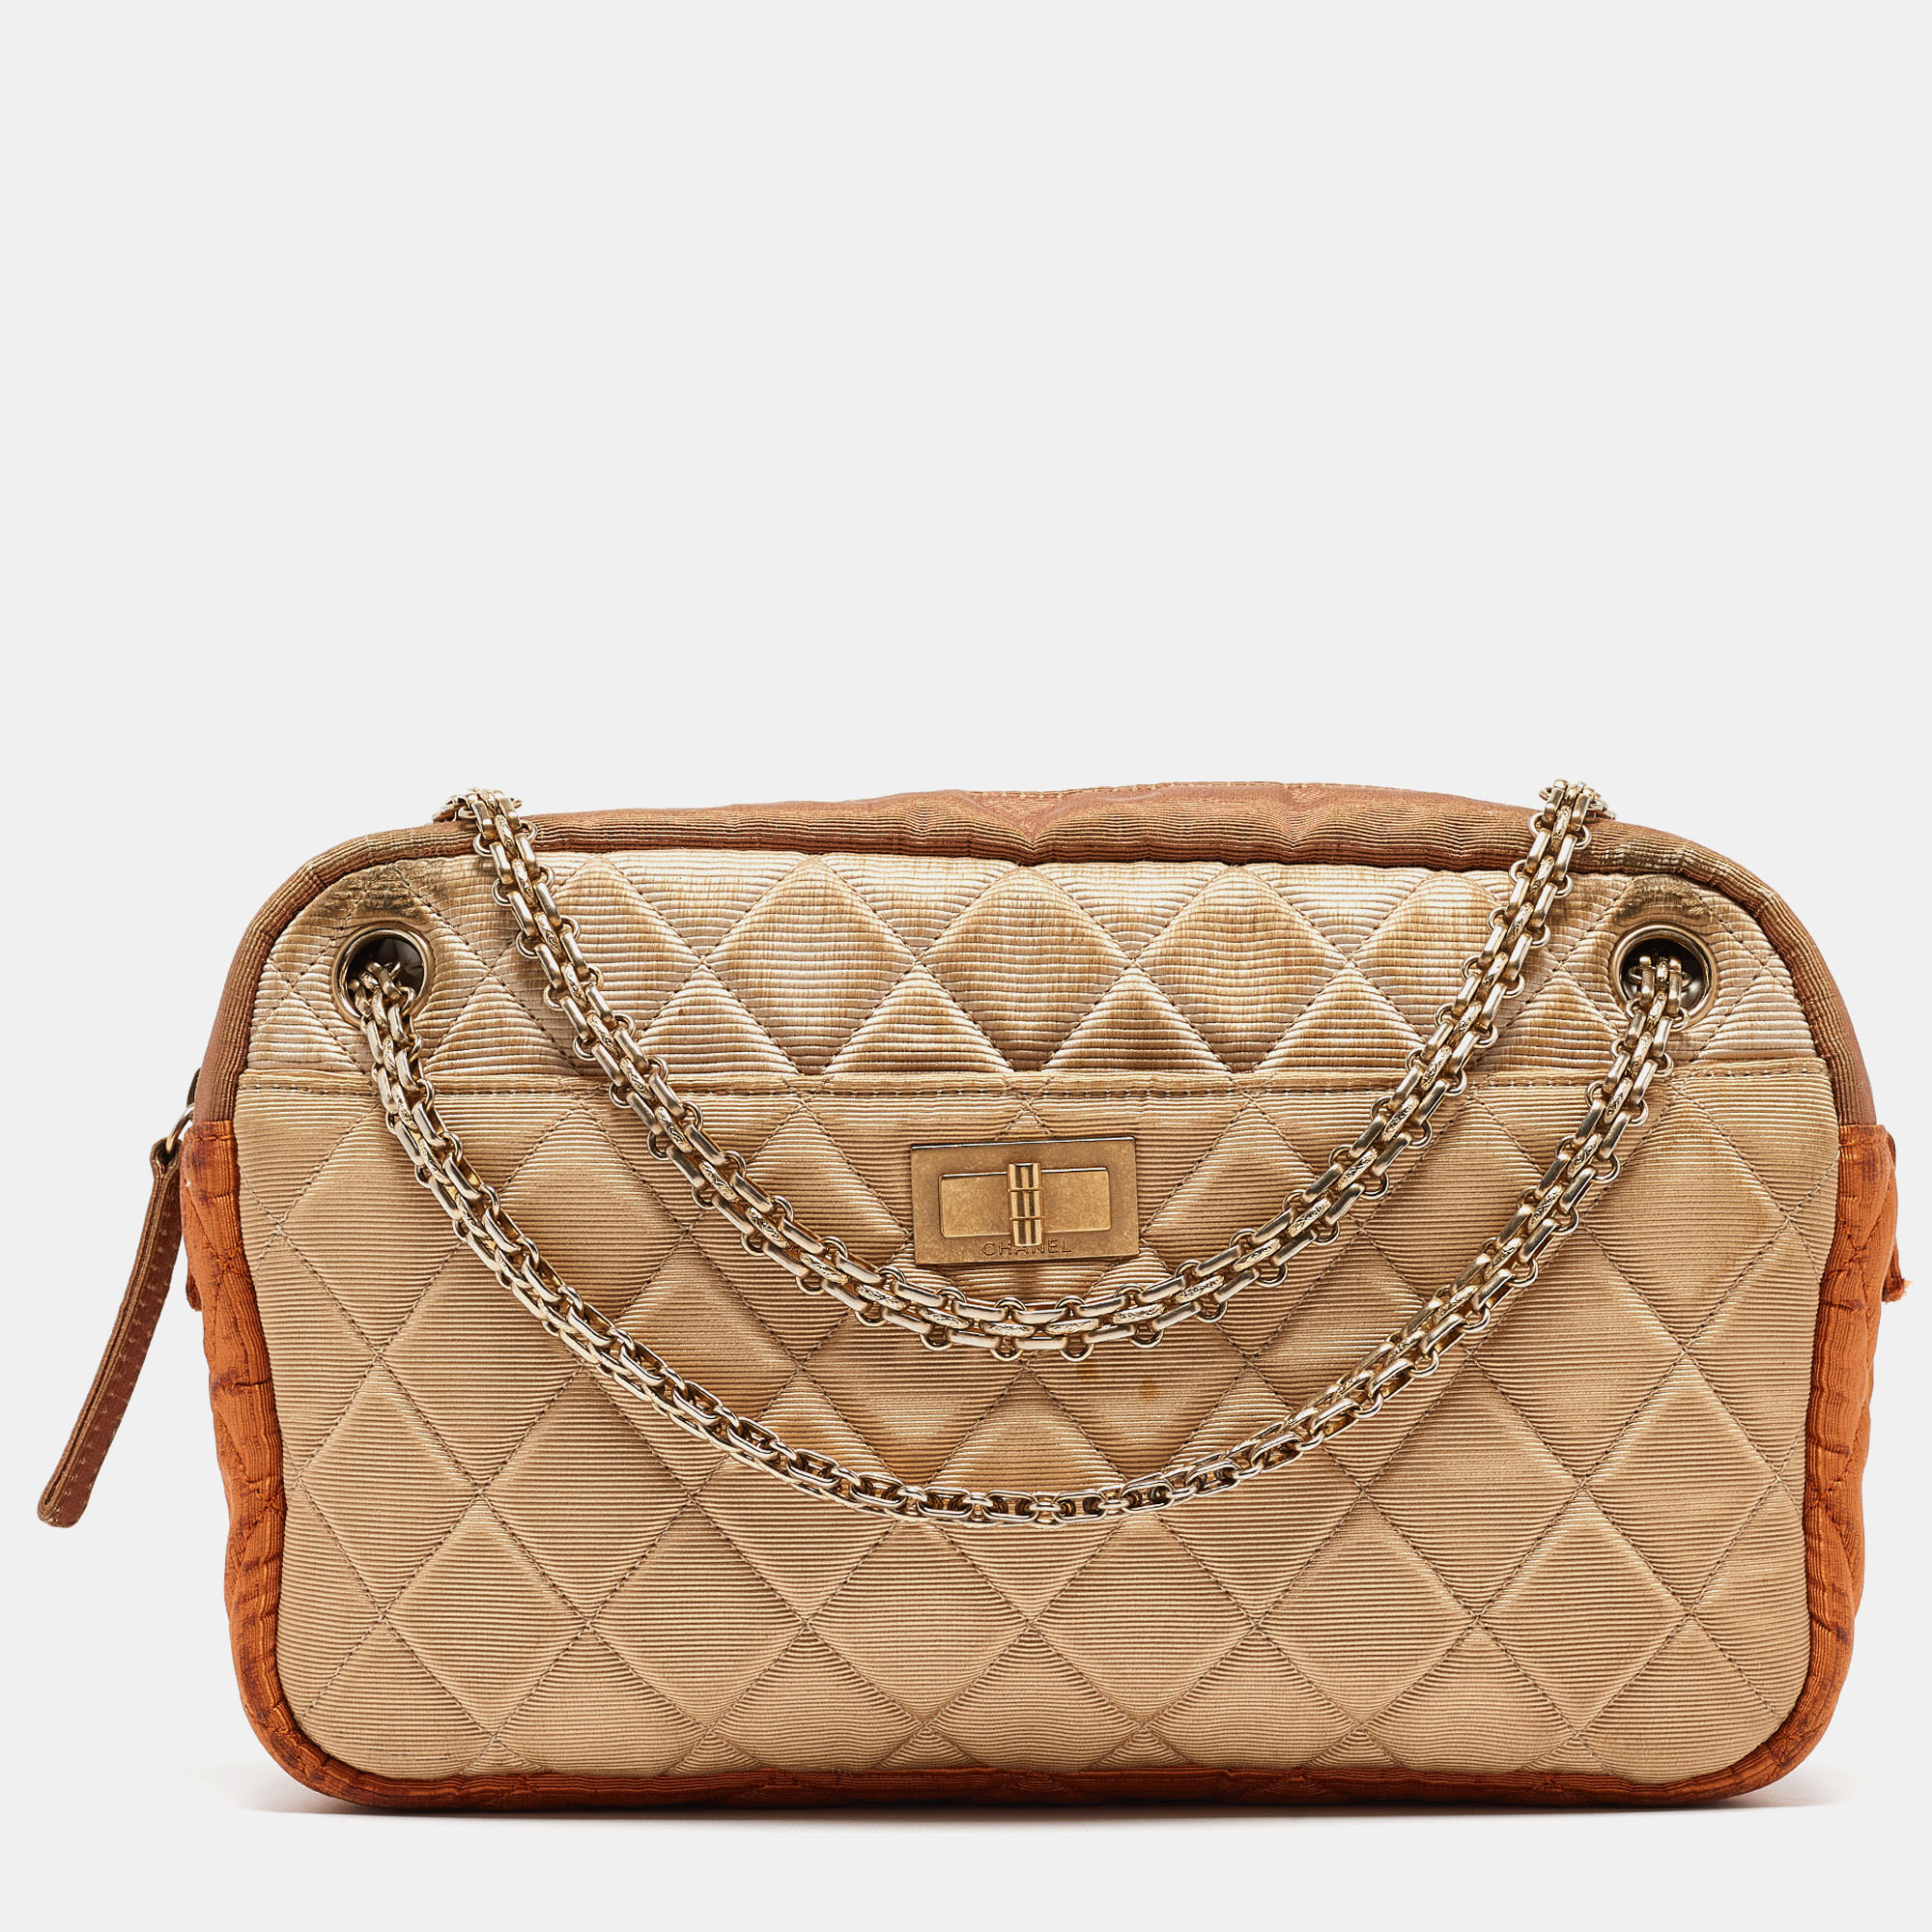 Chanel tricolor quilted fabric reissue camera bag